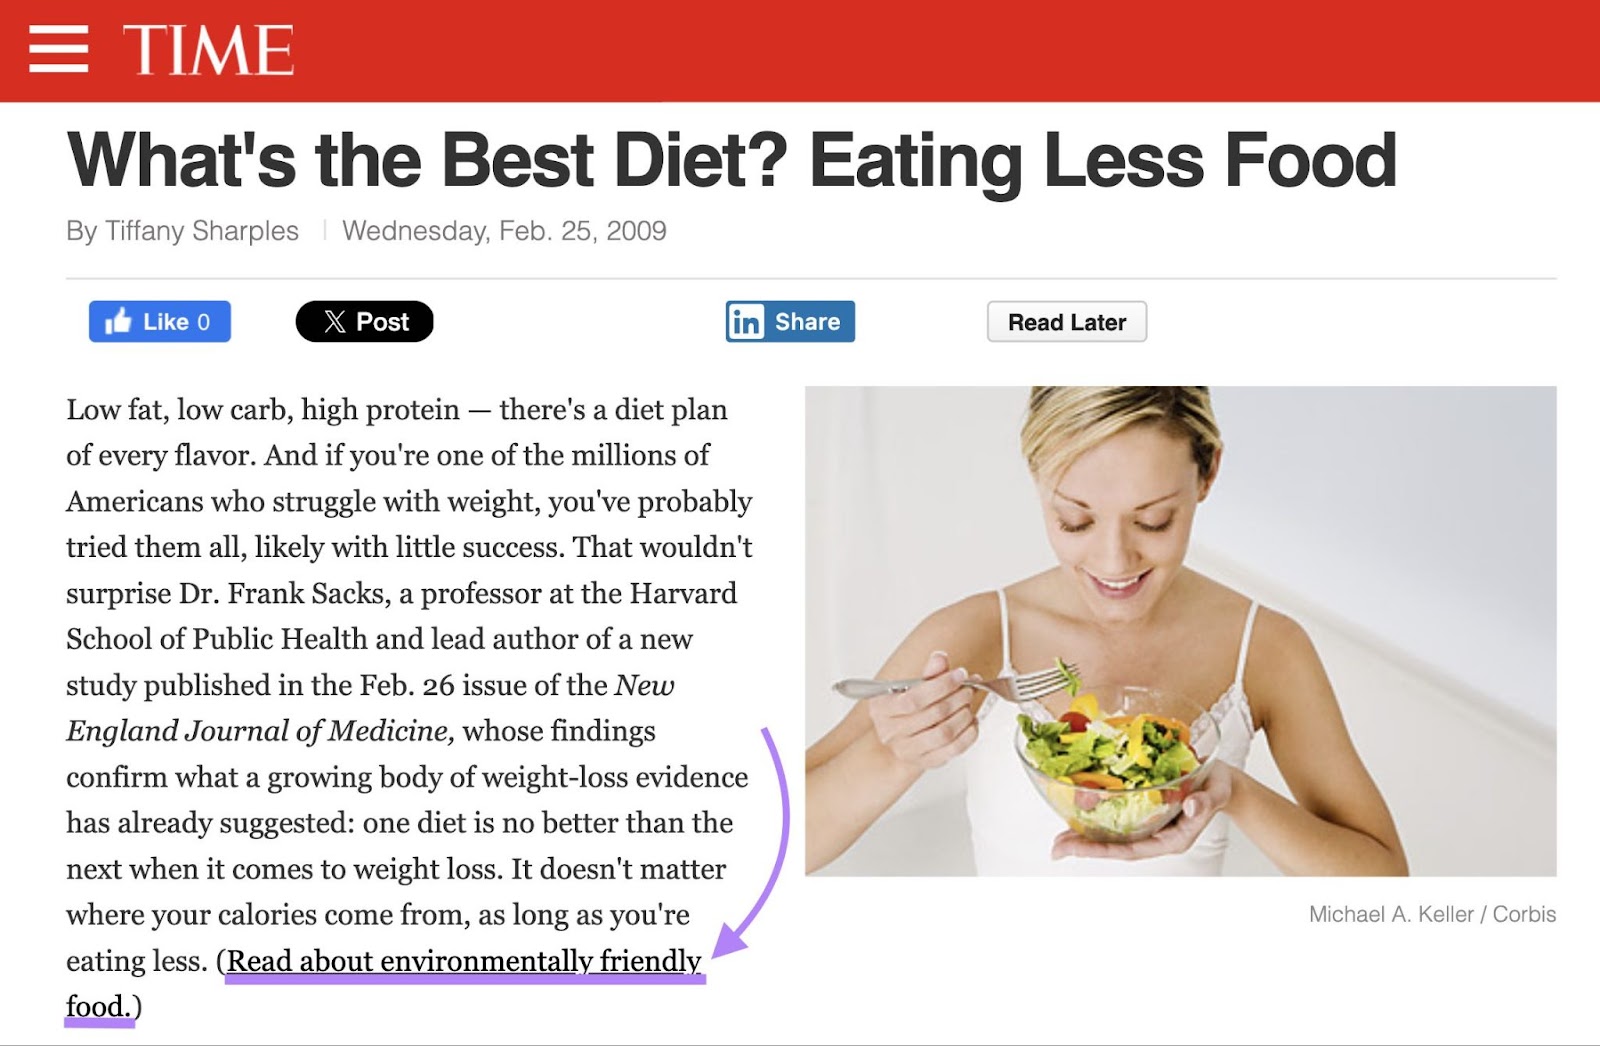 “Read about environmentally friendly food" link highlighted in the TIME Magazine article from above